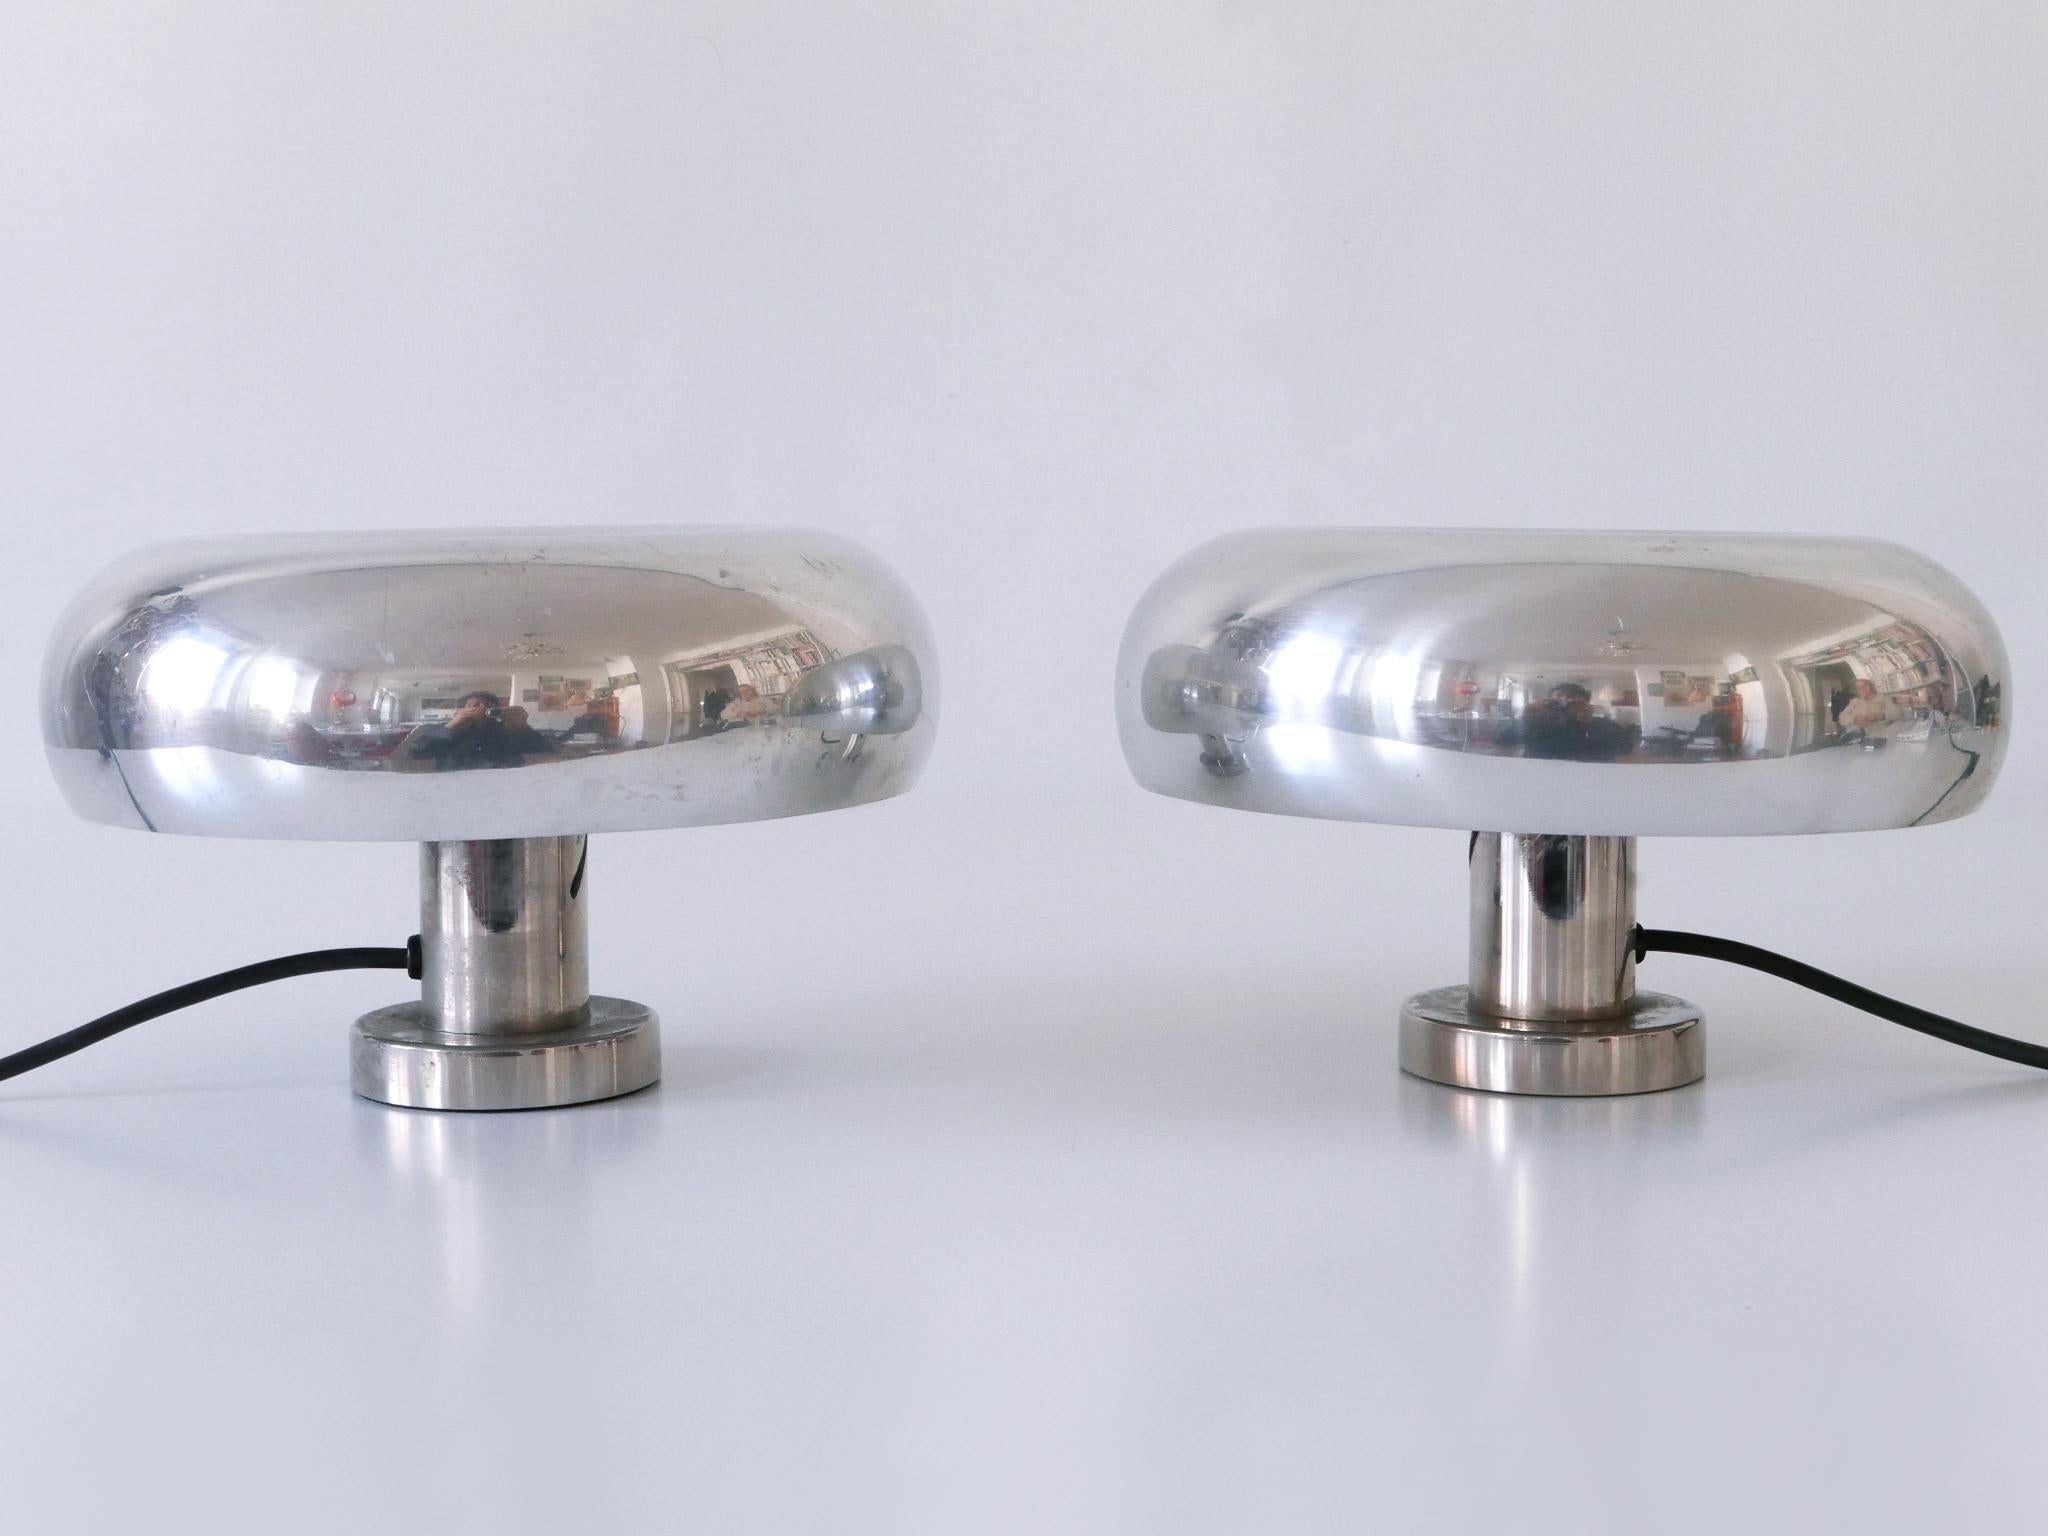 Set of Two Table Lamps or Sconces Pox by Ingo Maurer for Design M Germany, 1960s For Sale 9